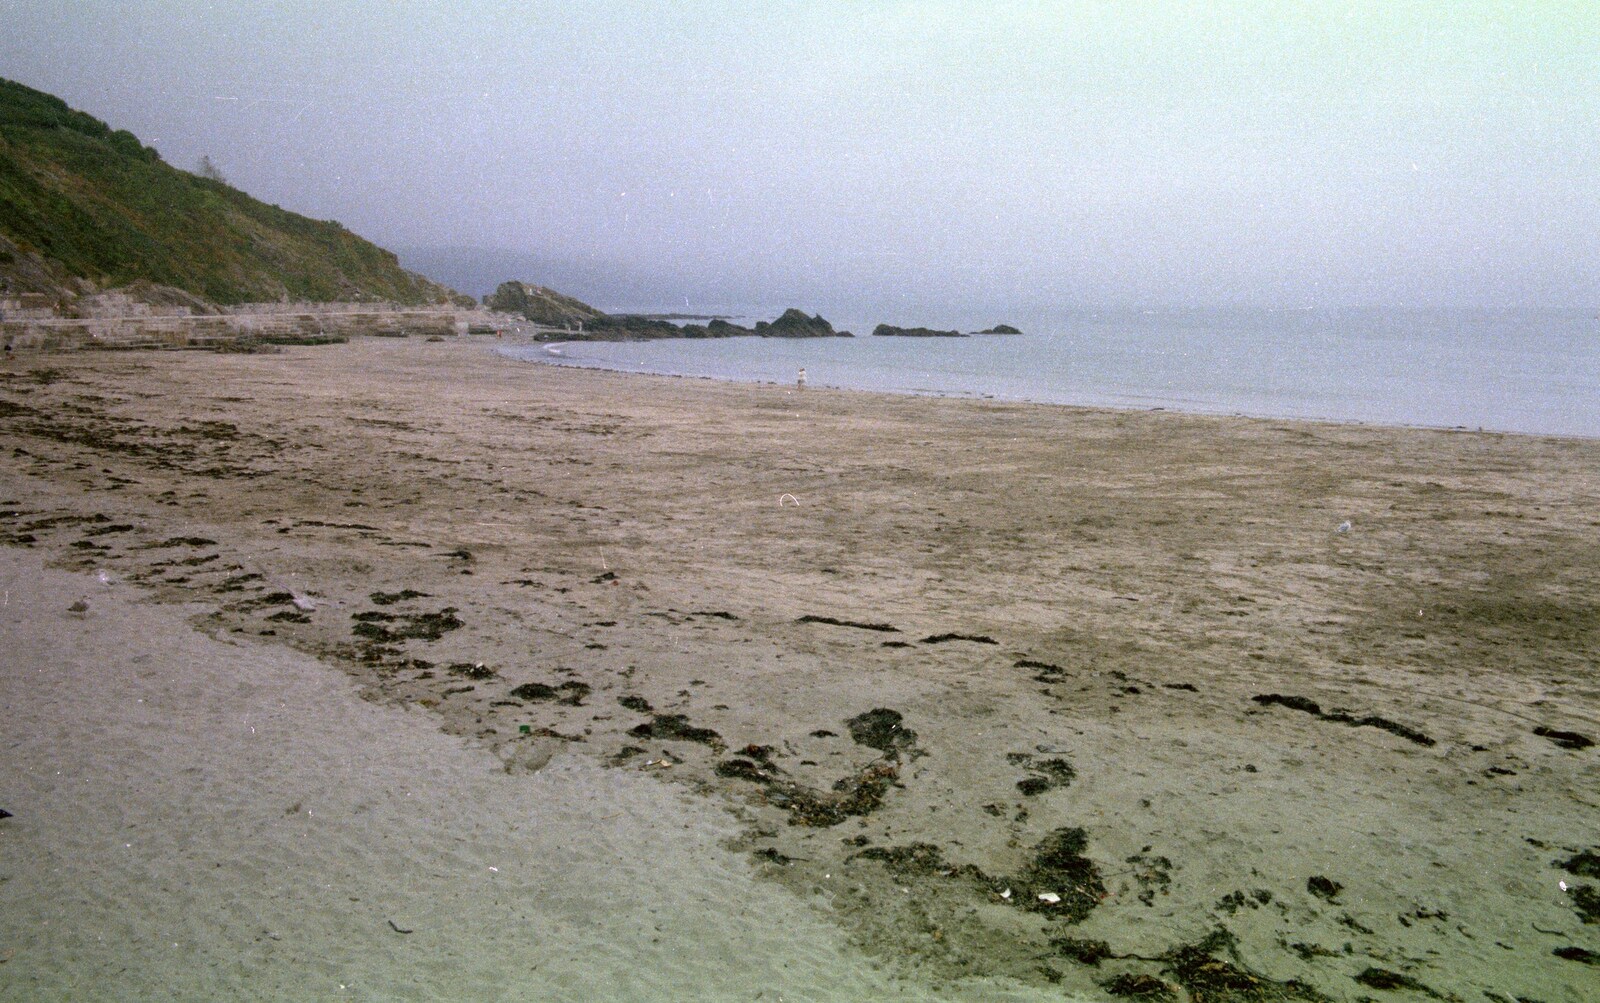 A beach somewhere in Whitsand Bay from A Trip to Trotsky's Mount, Dartmoor, Devon - 20th March 1987